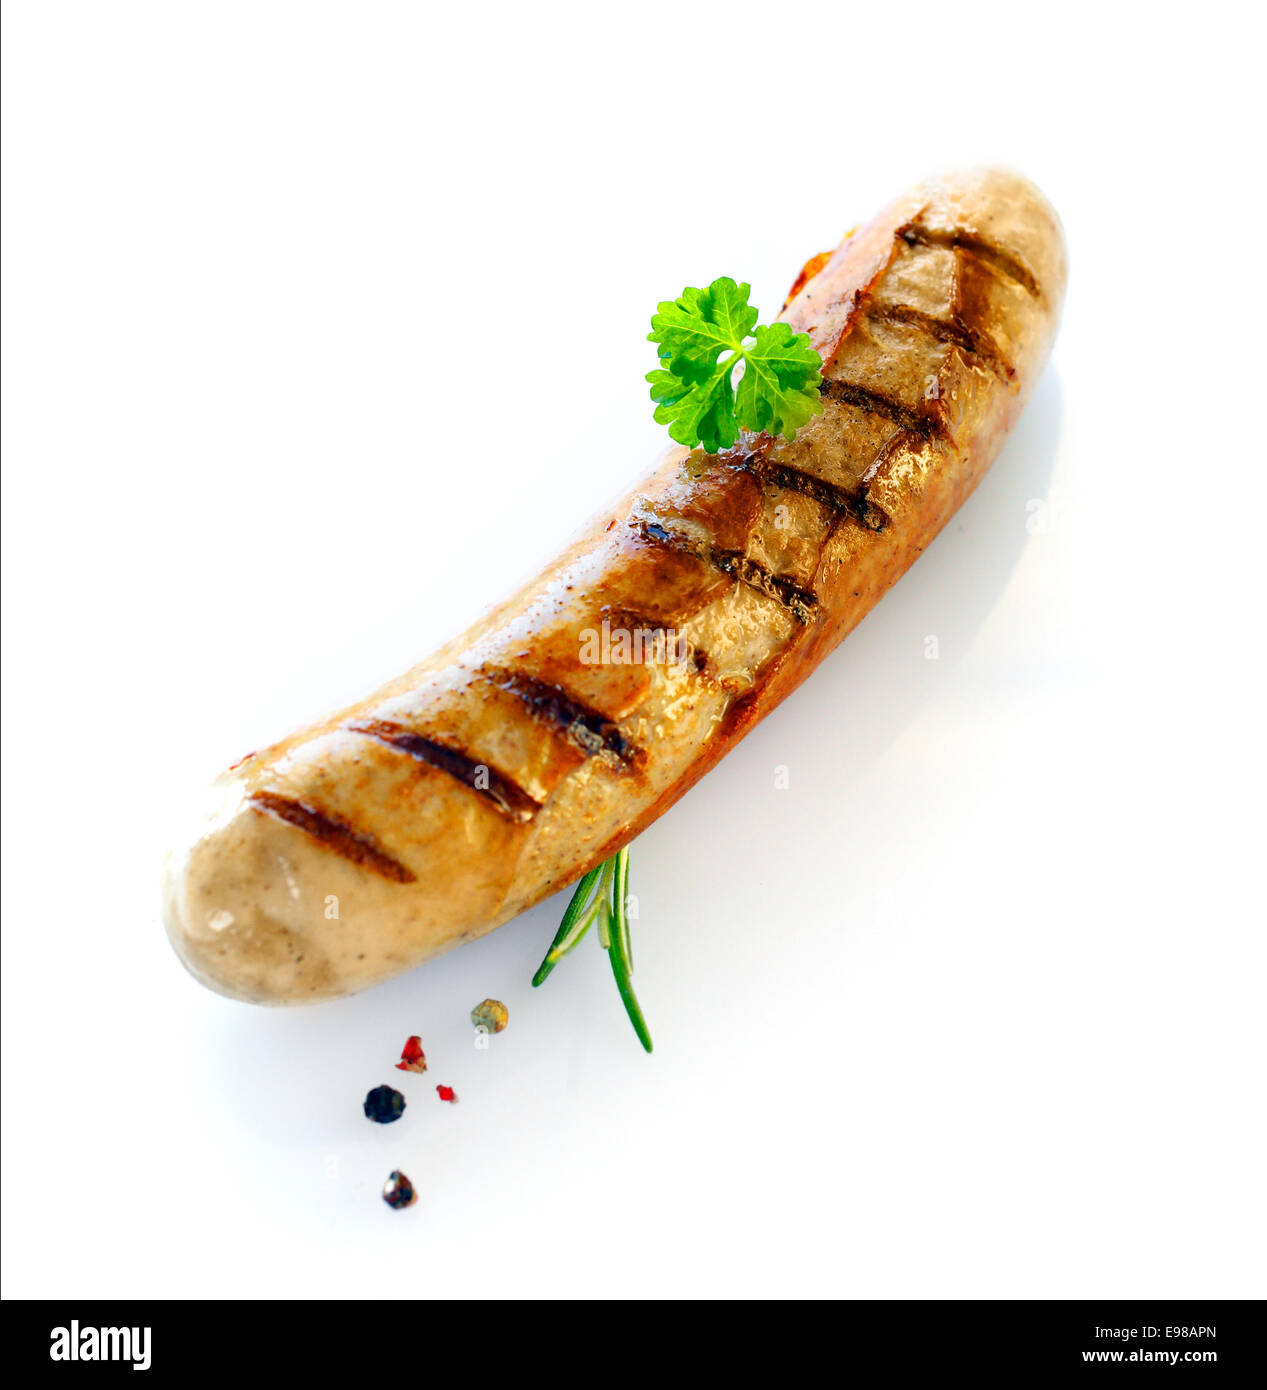 One cooked sausage with a sprig of parsley and rosemary shot against white. Stock Photo